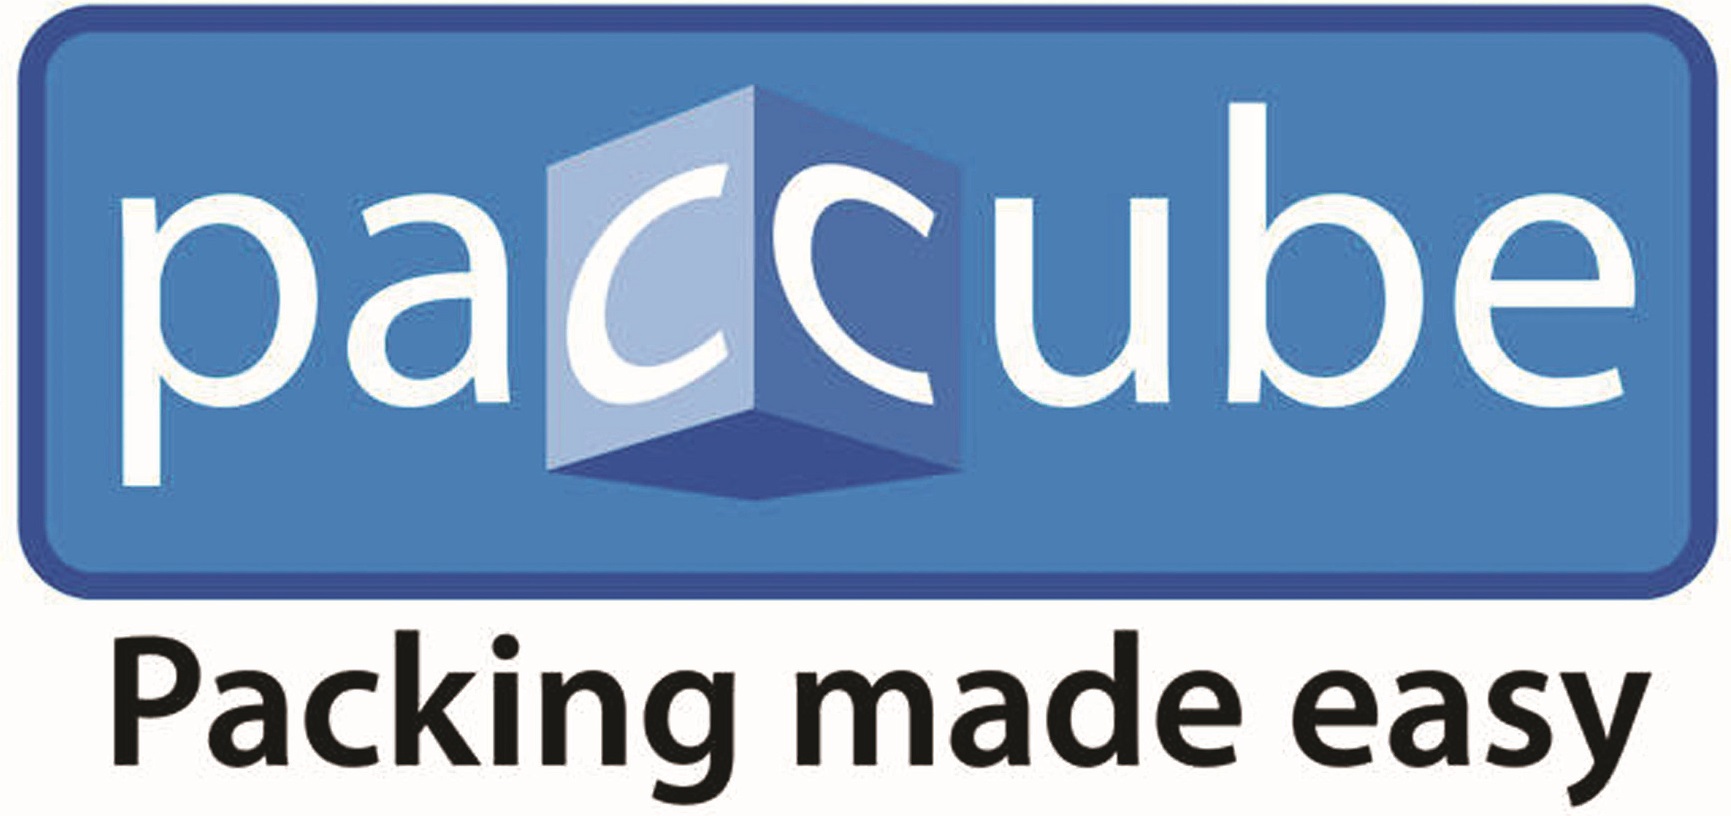 Paccube